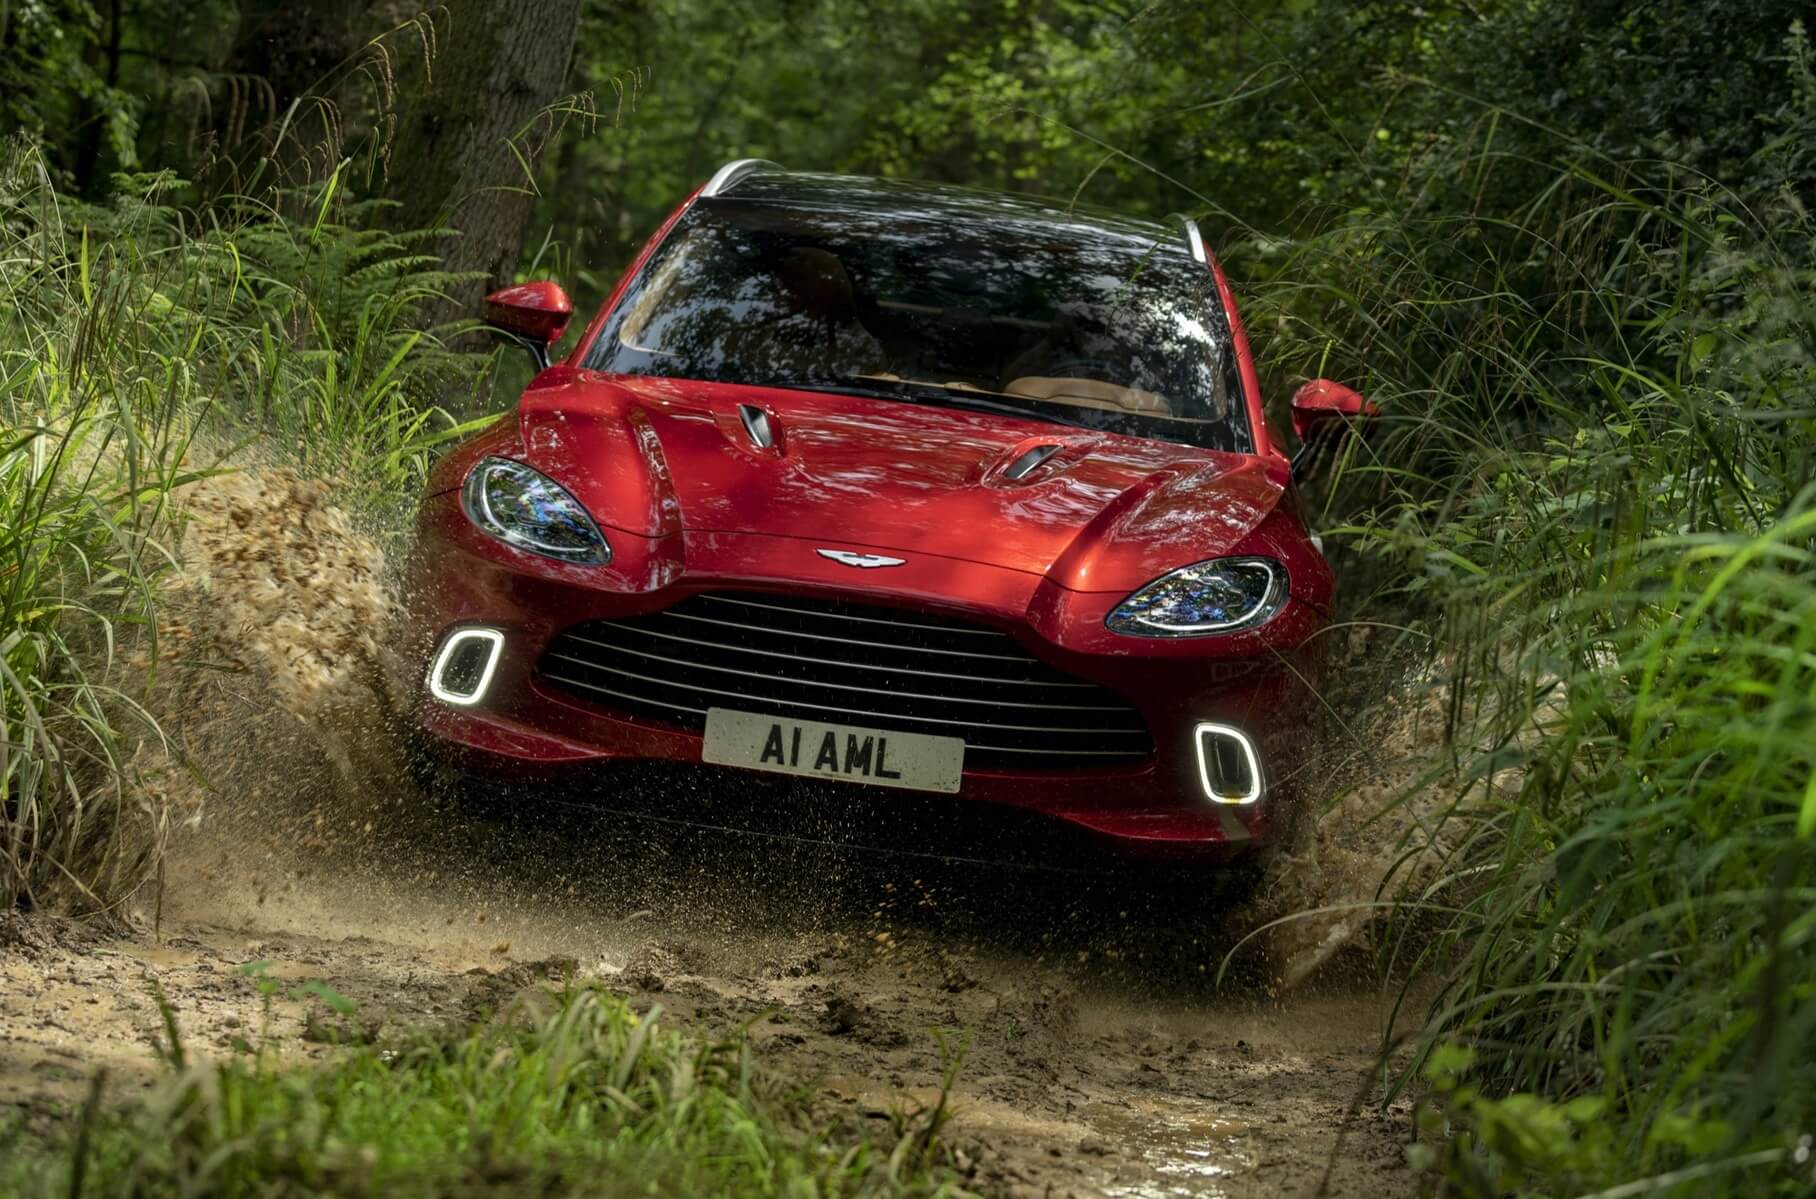 Aston Martin may have an extreme SUV